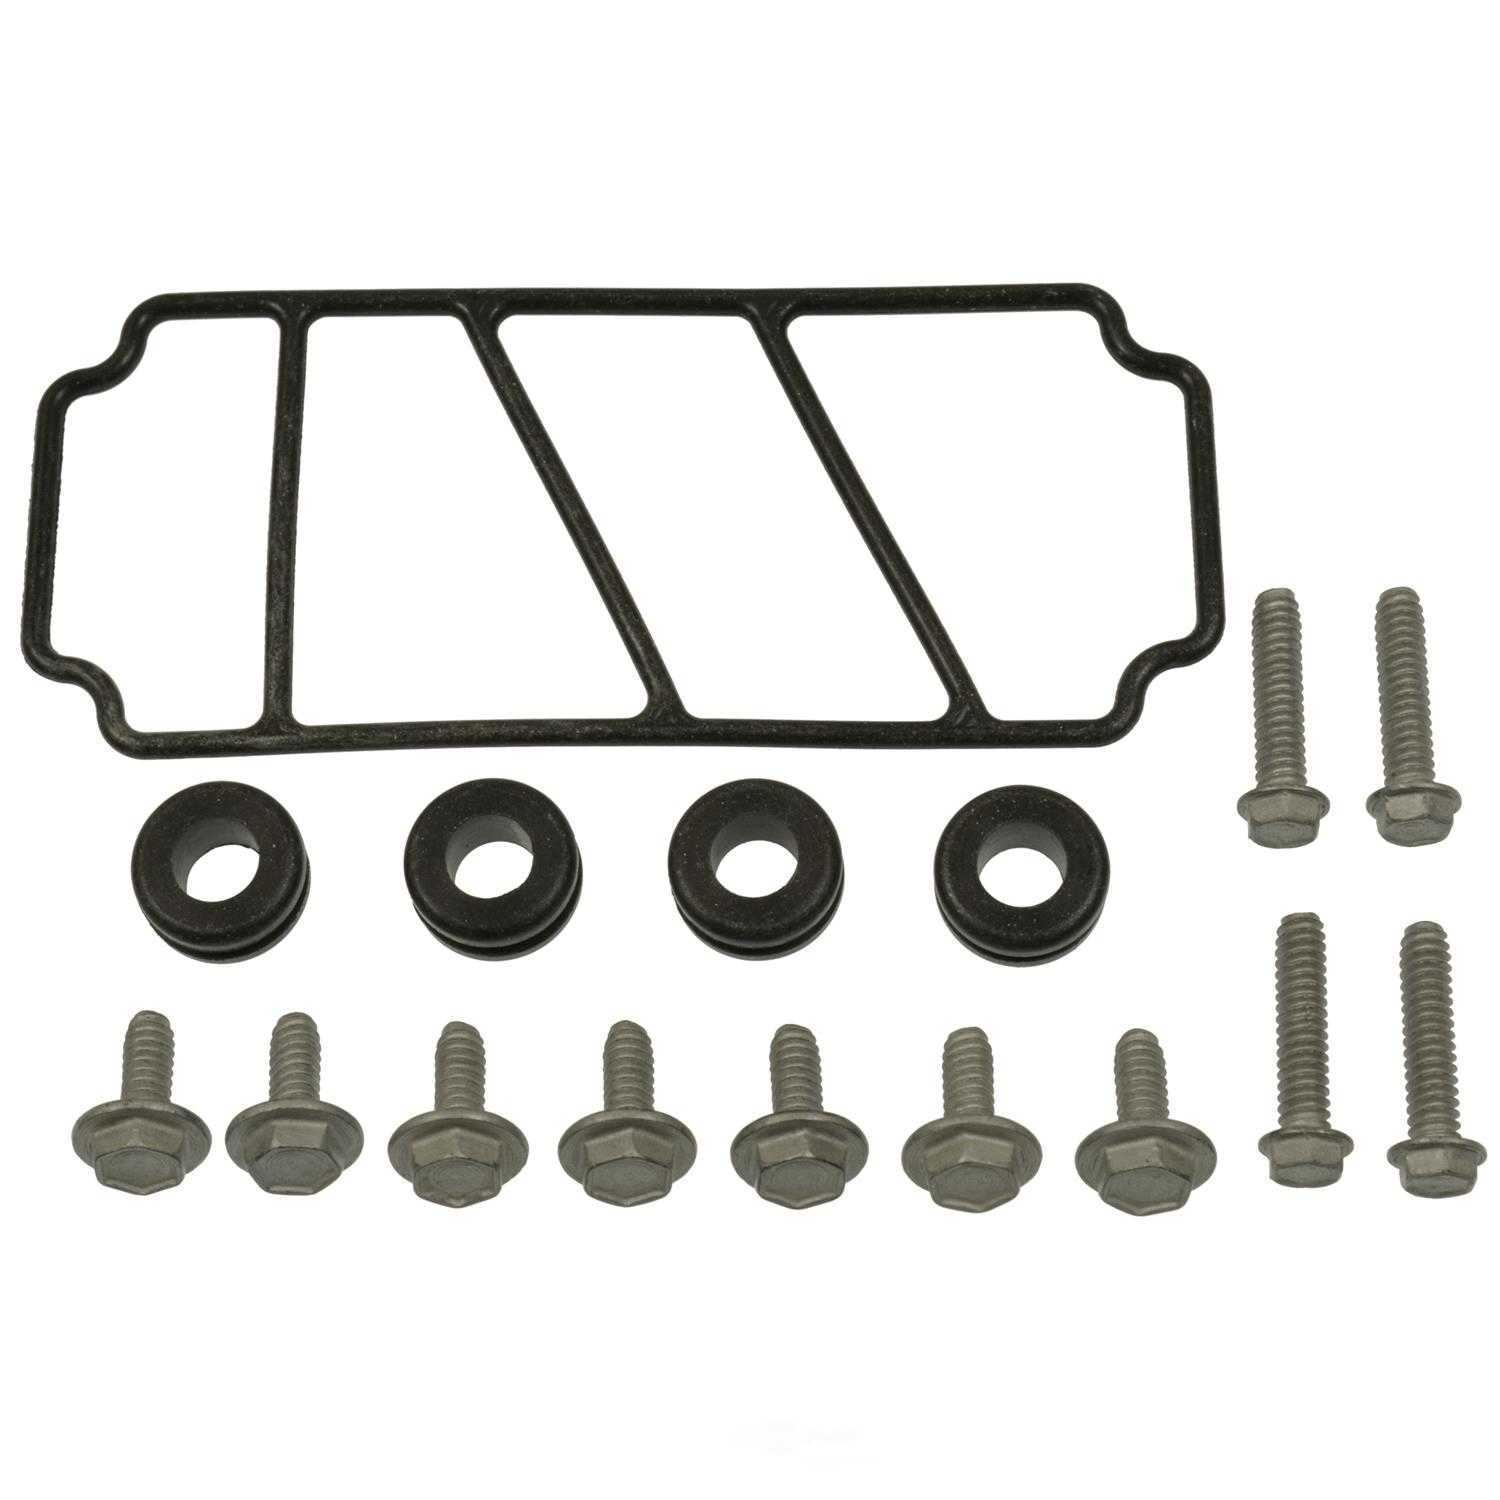 STANDARD MOTOR PRODUCTS - Horizontal Fuel Conditioning Module Cover Gasket Kit - STA HFG101